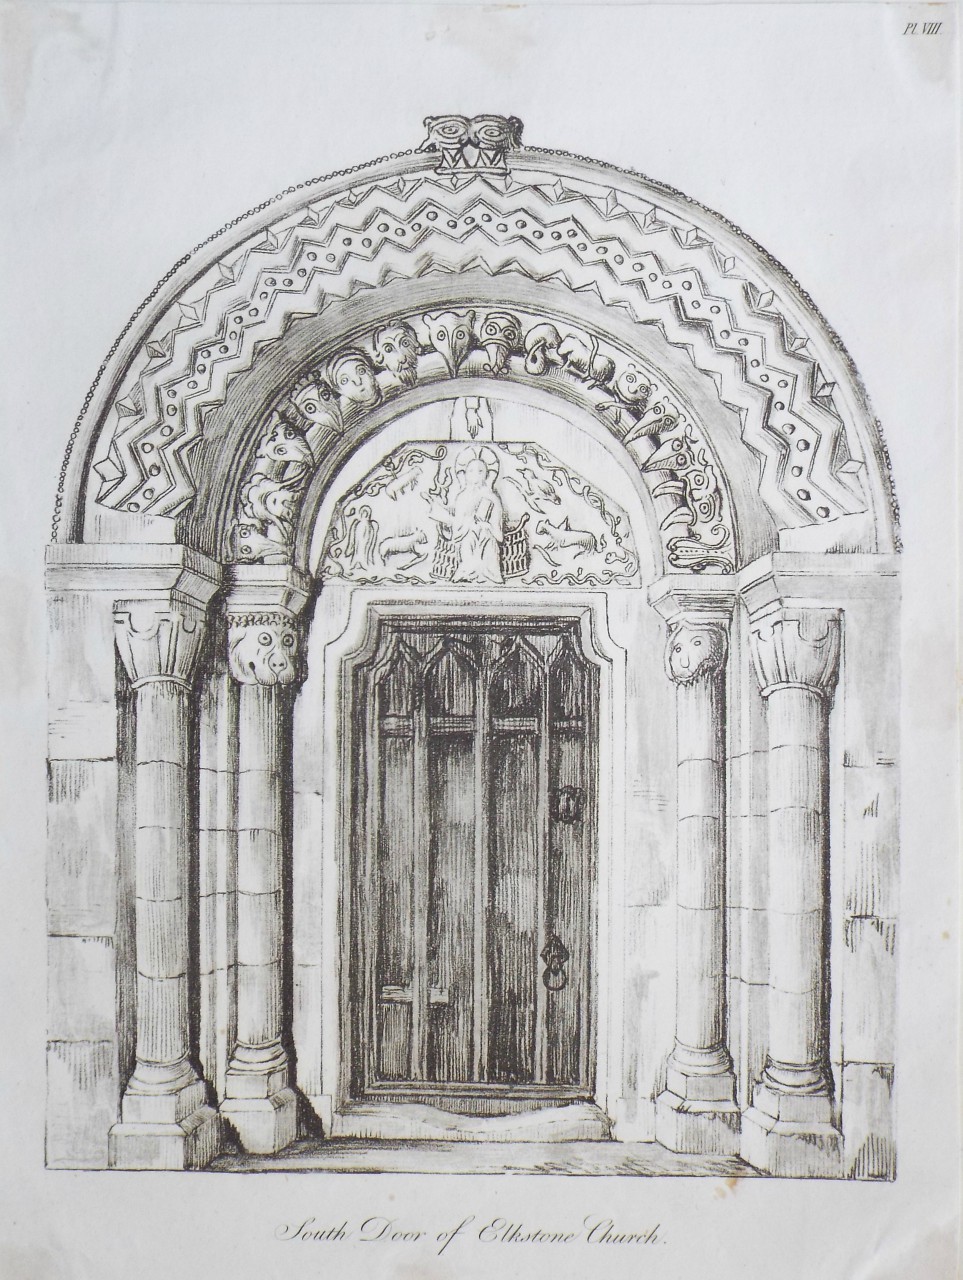 Etching with aquatint - South Door of Elkstone Church.